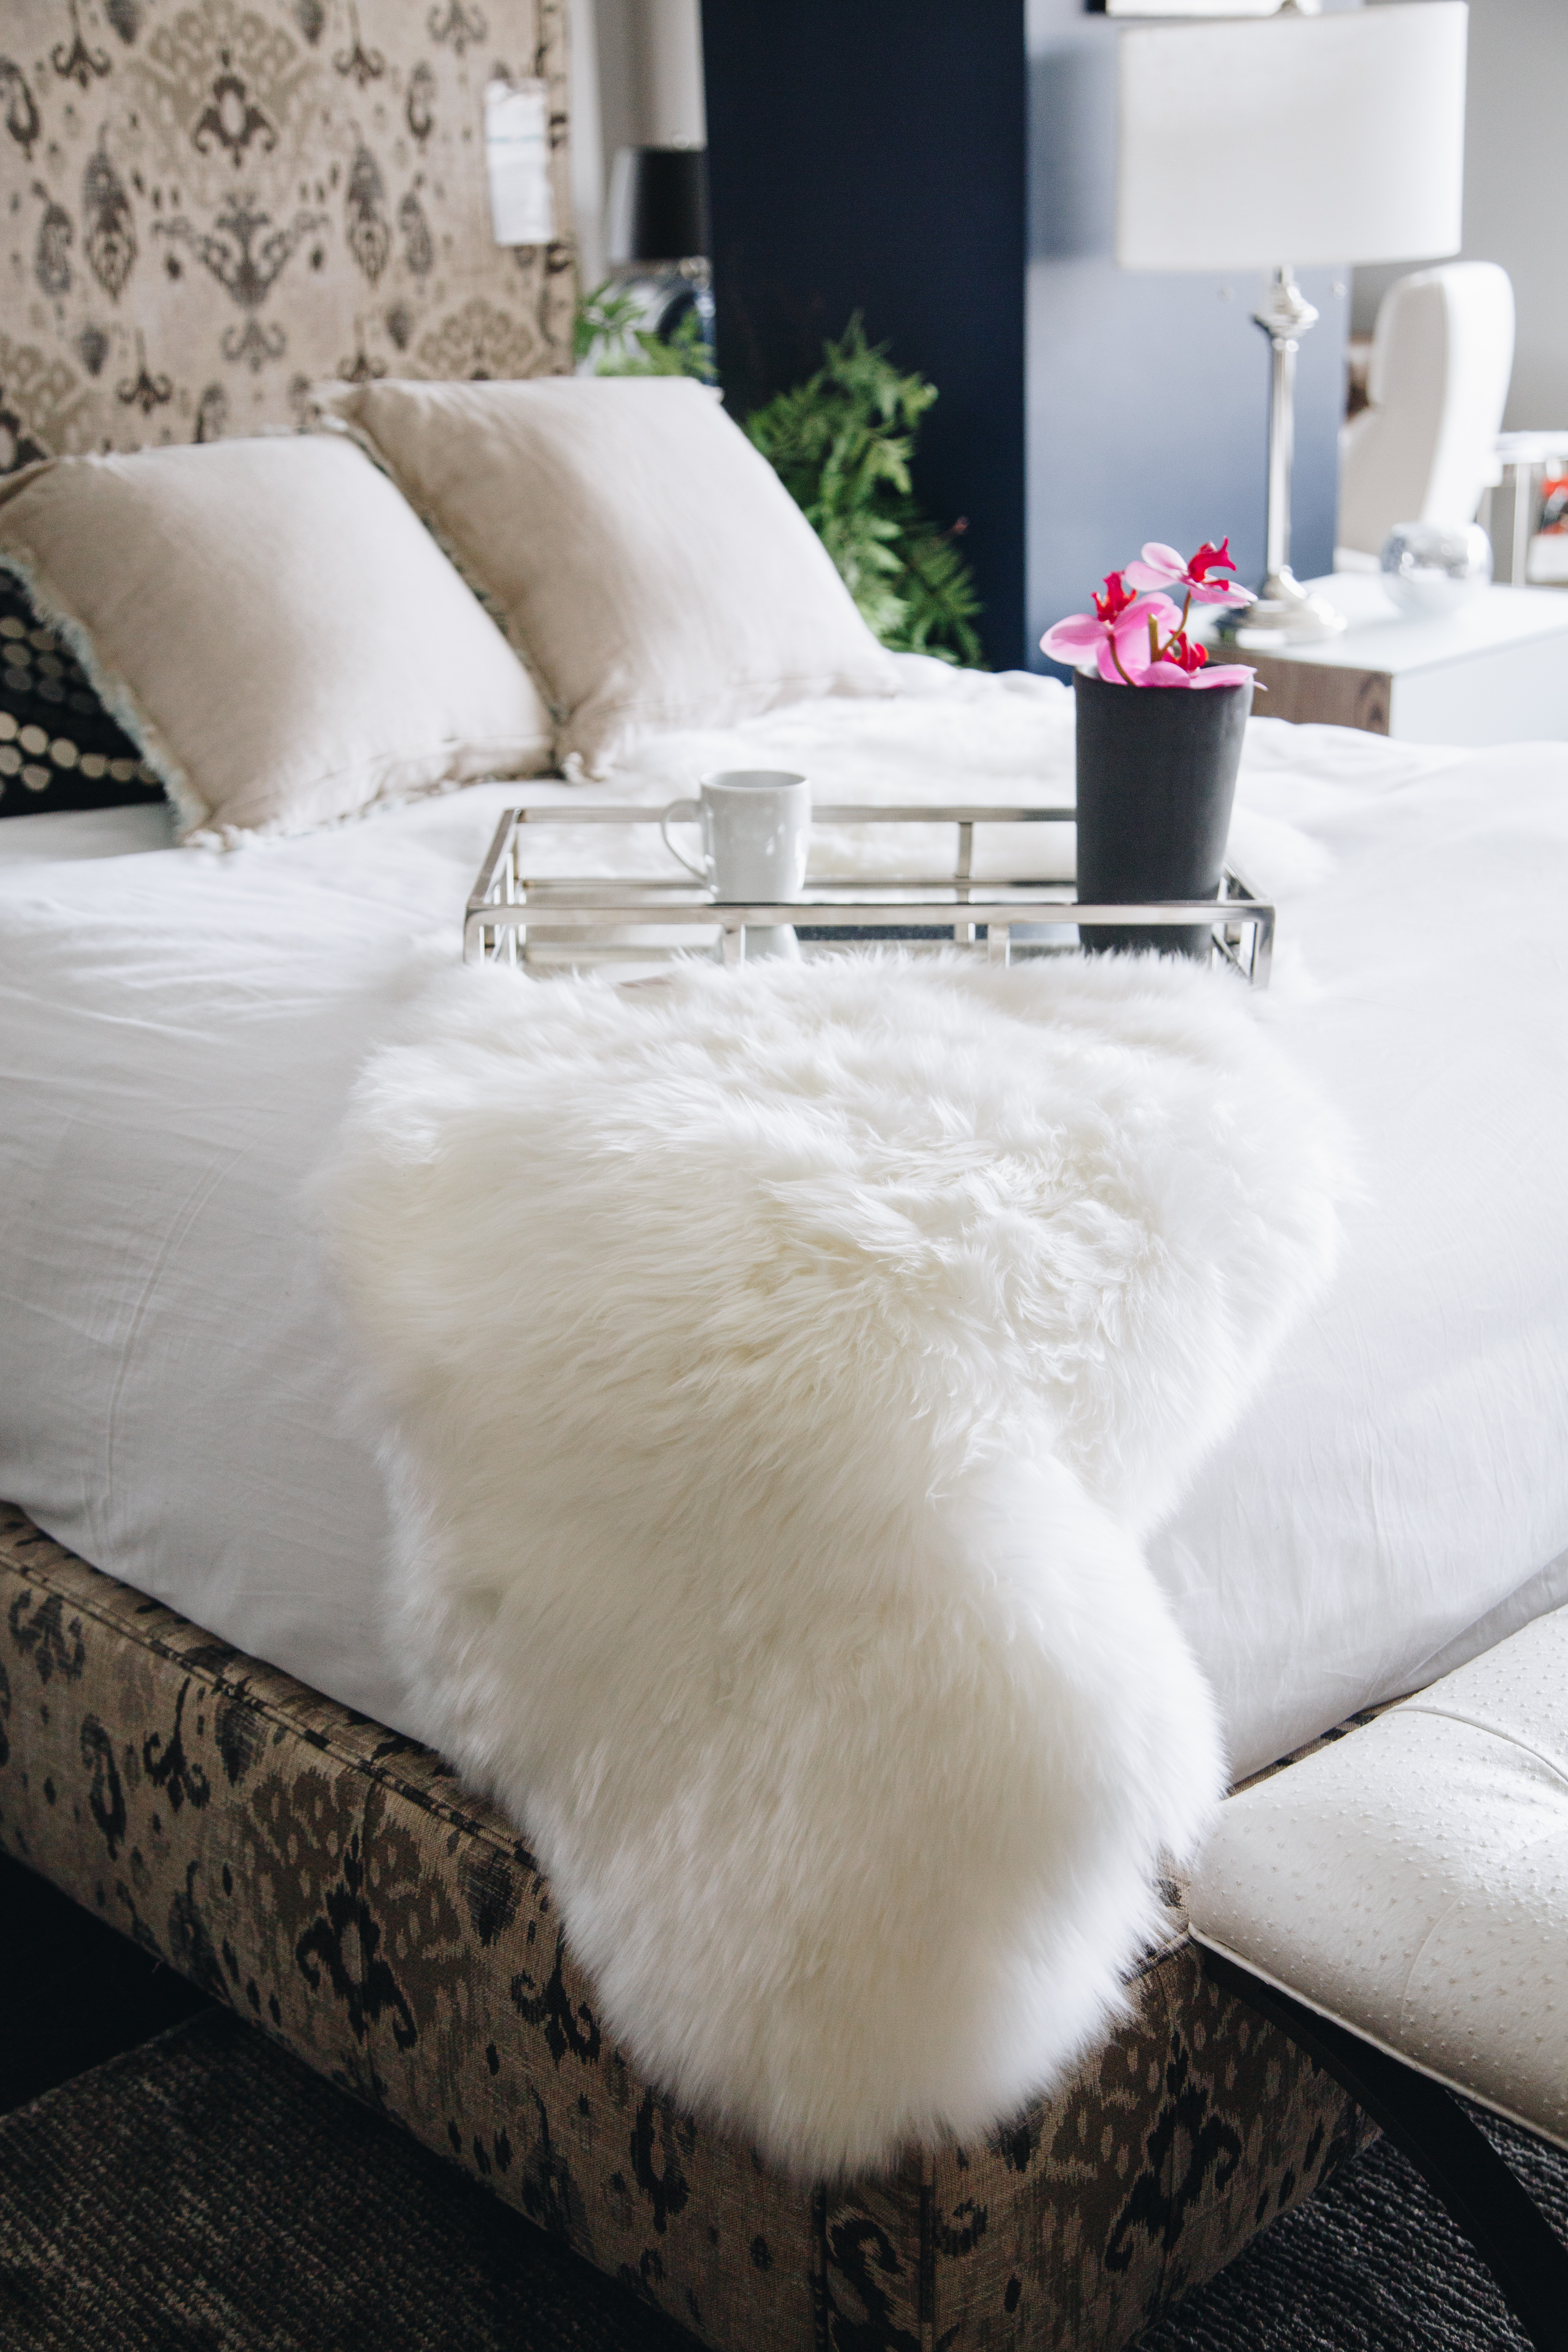 6 Cozy Ways to Warm Up This Winter | Image courtesy Circle Furniture